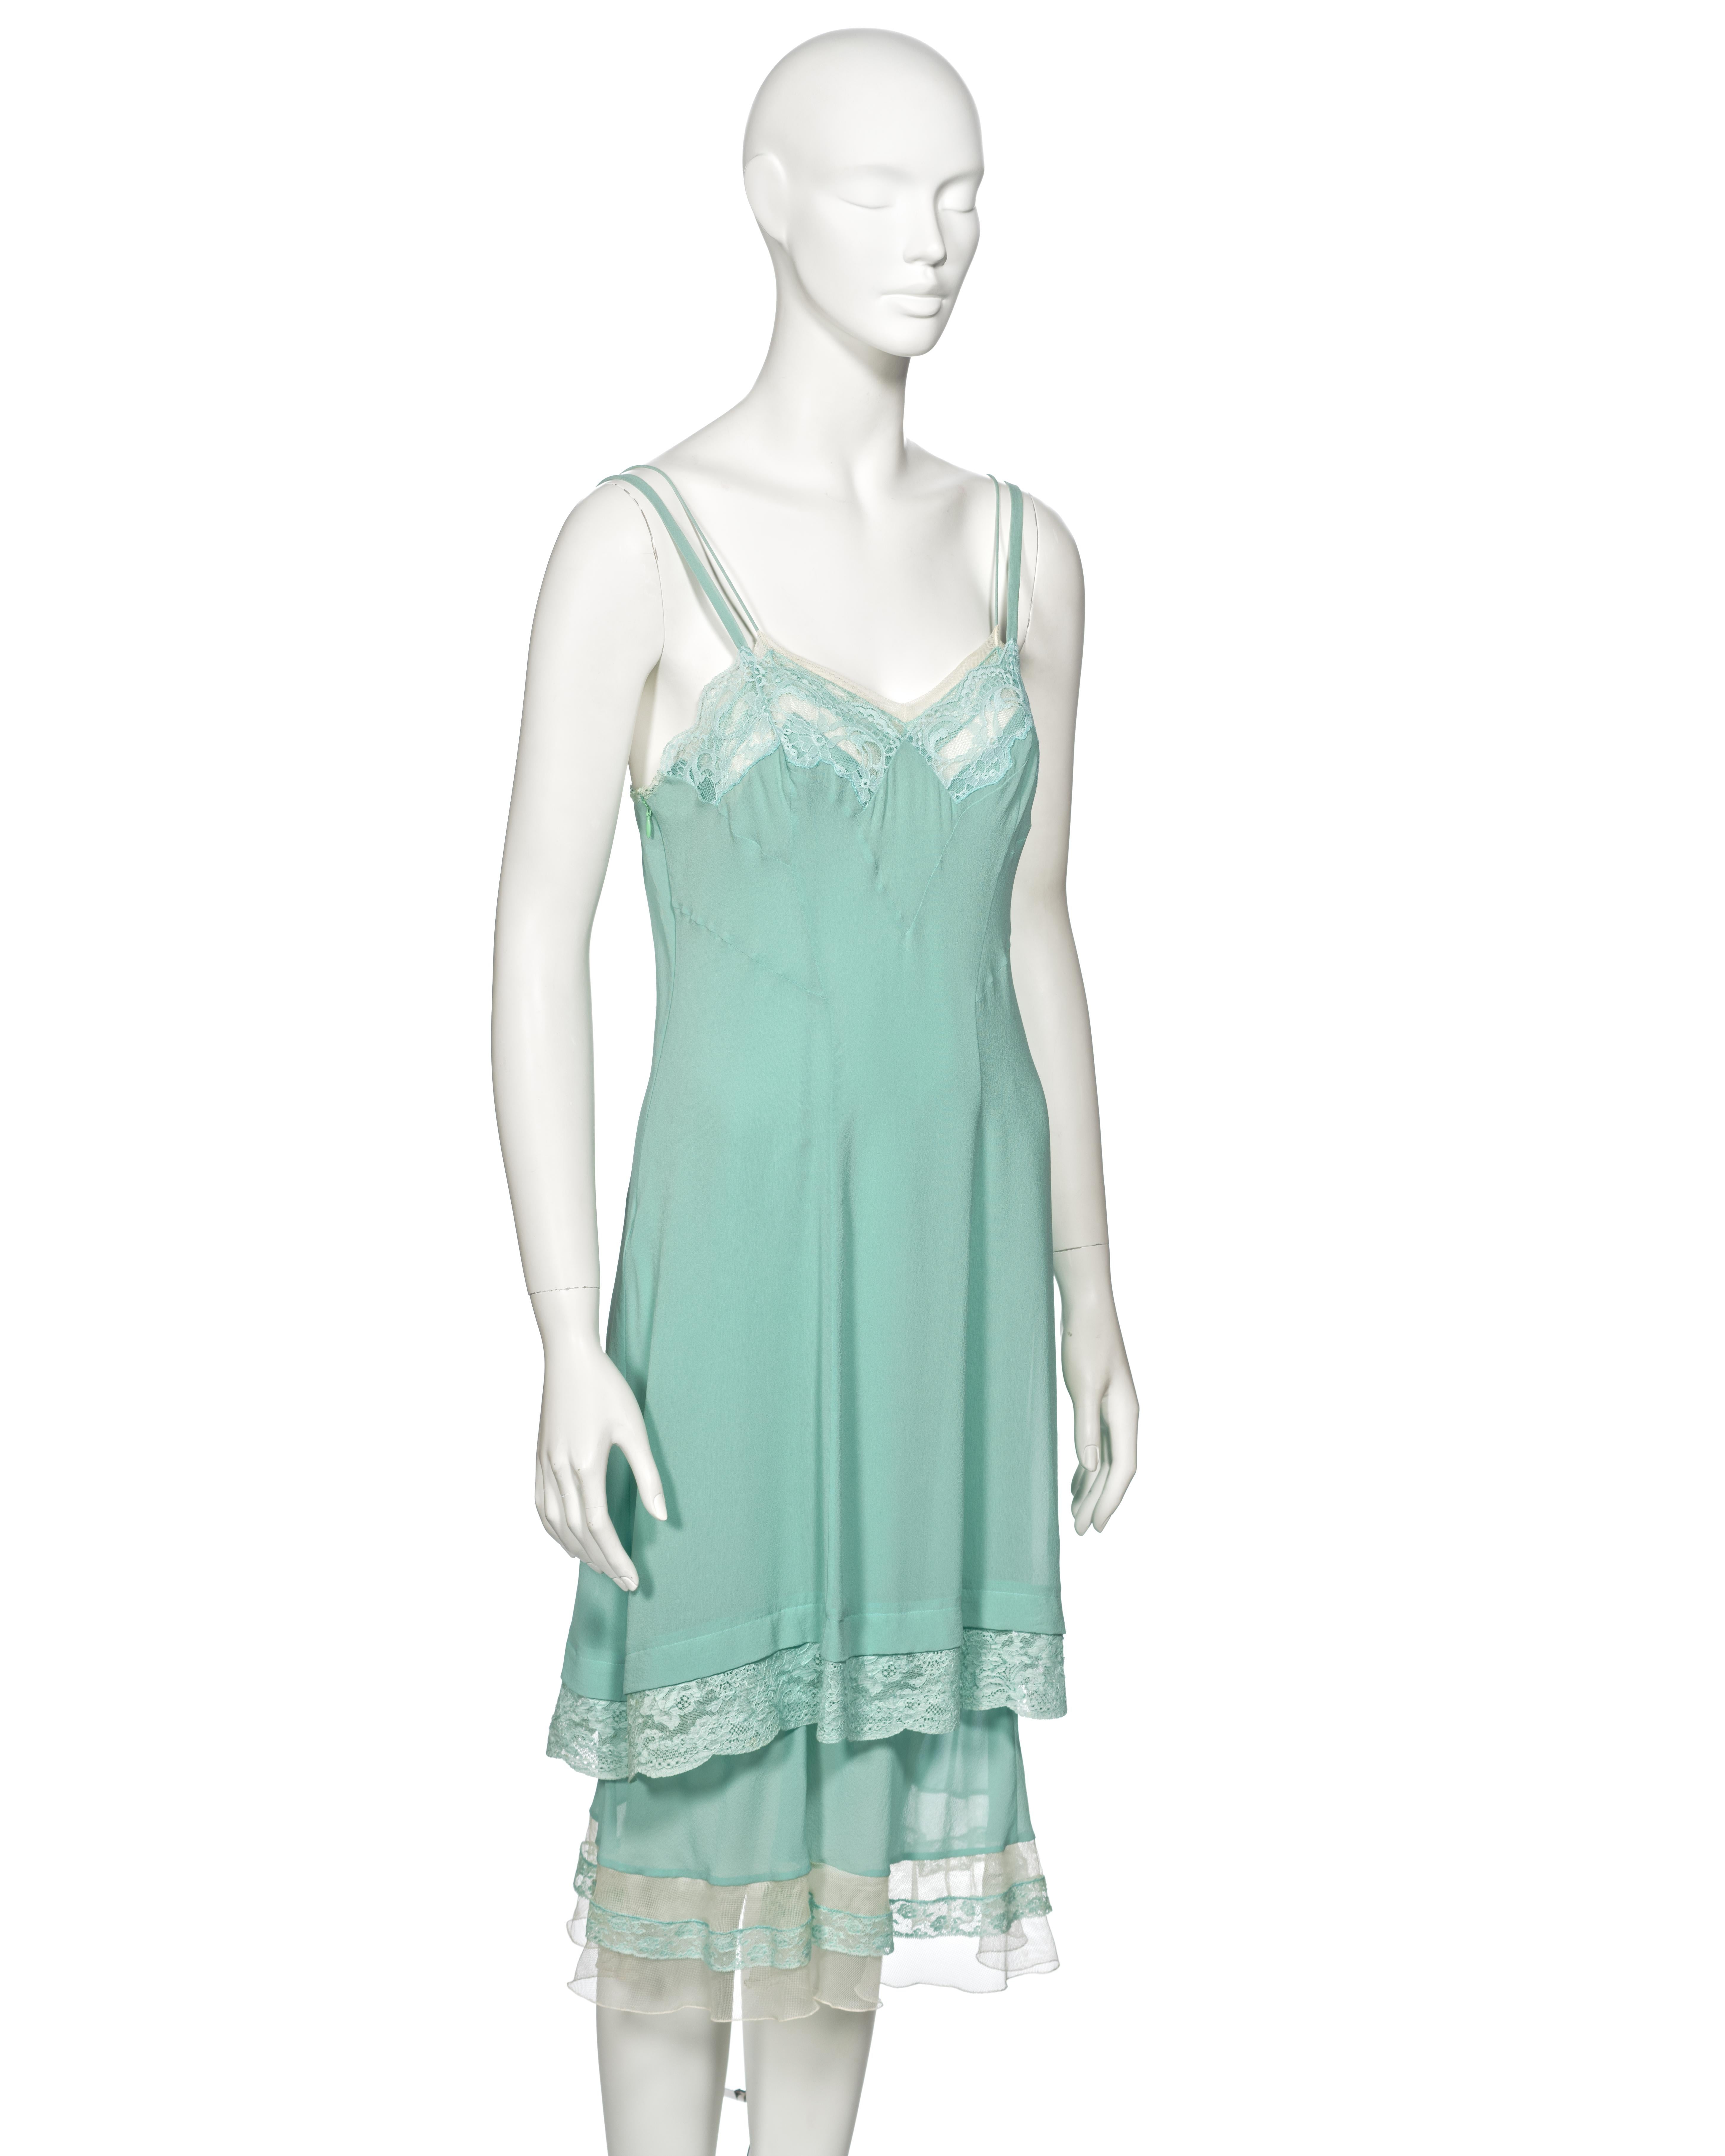 Christian Dior by John Galliano Turquoise Silk Double Layered Dress, ss 2005 1